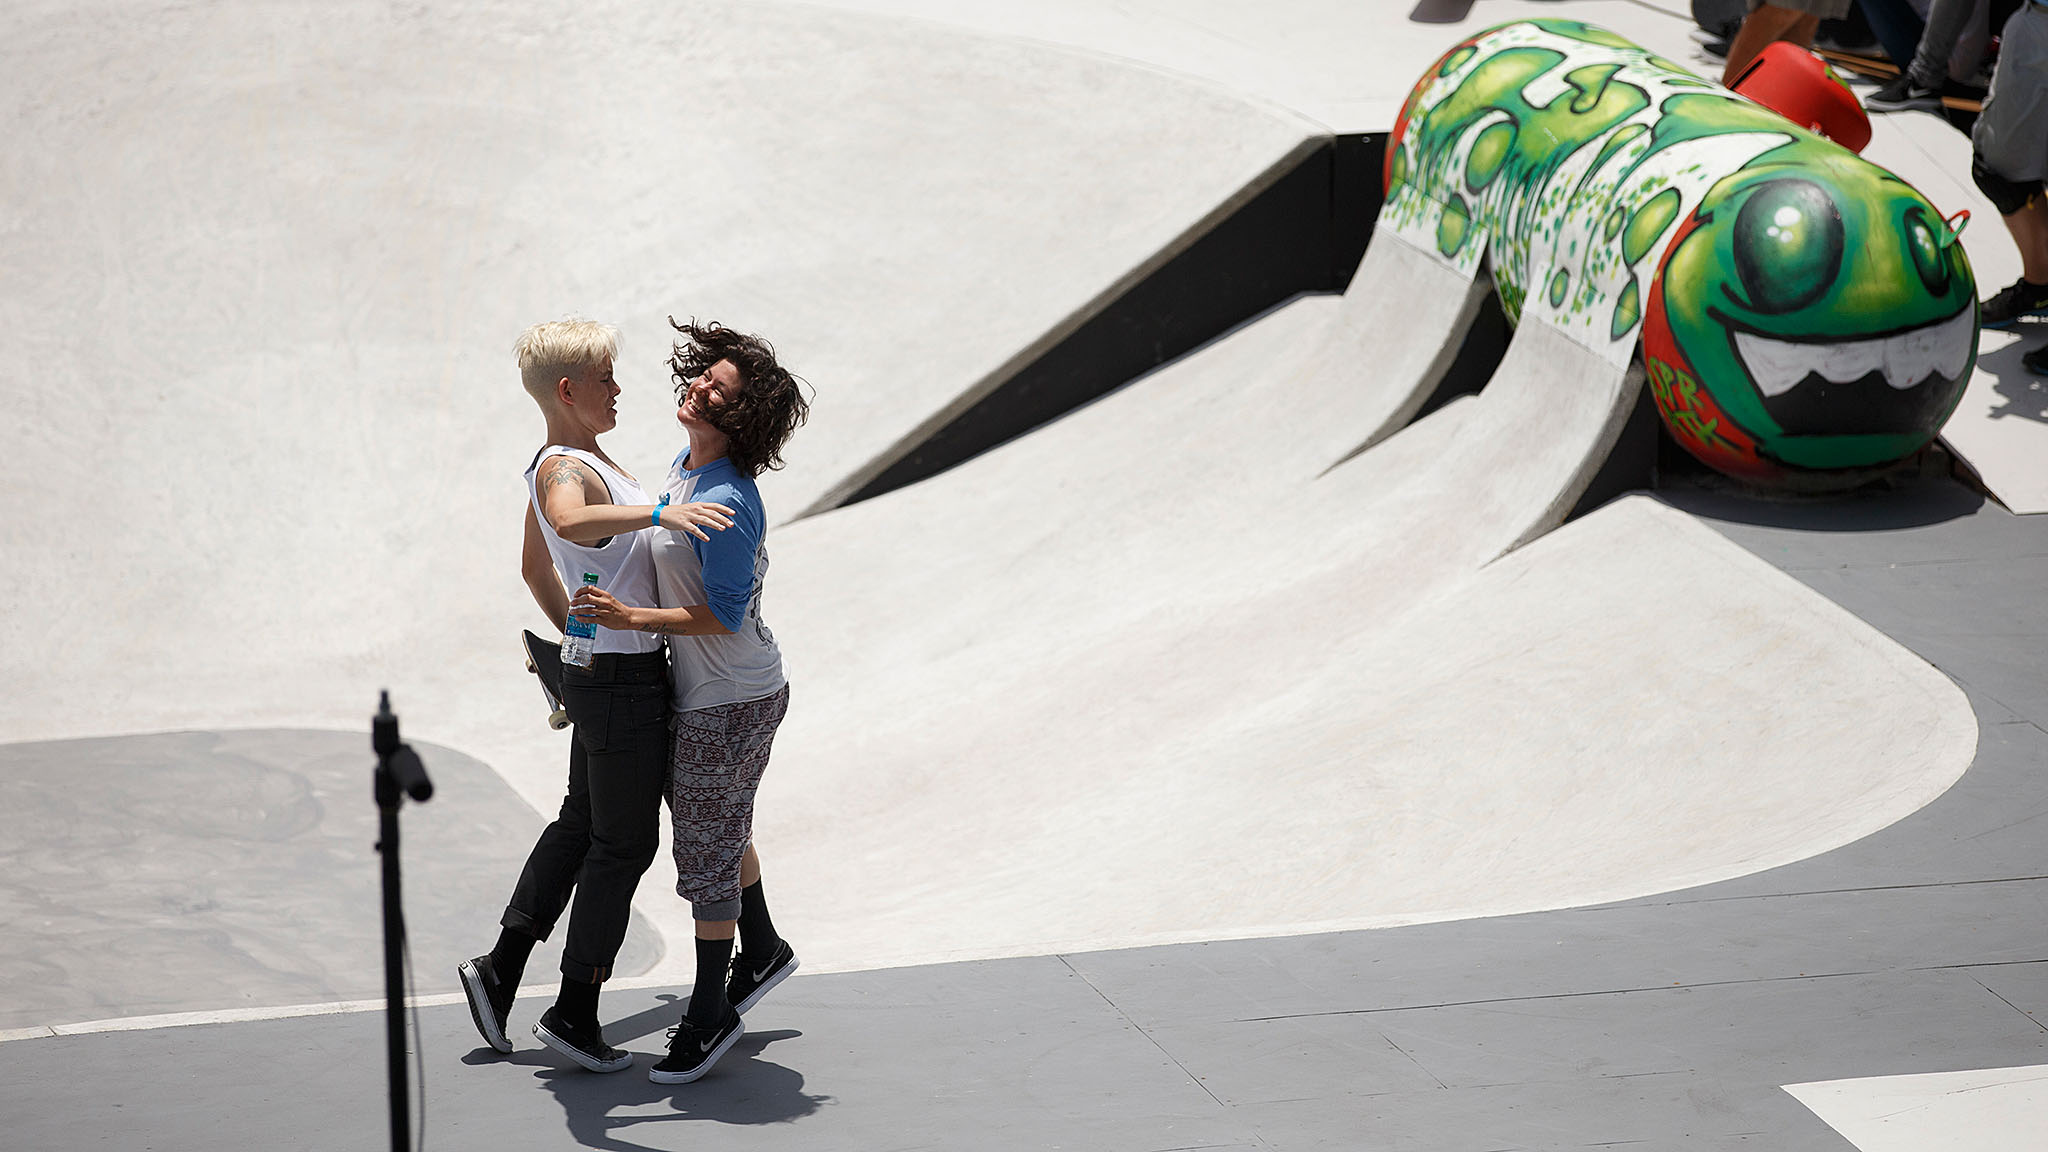 It's about time, screamed women's skateboarding legend Vanessa Torres, right, as she rushed the course to congratulate Lacey Baker, left, for winning Skateboard Street on Sunday in Austin. Baker, a highly technical street skateboarder who specializes in flip tricks, already held three X Games medals -- two silvers from 2013 and one bronze from 2006 -- but this is her first gold.